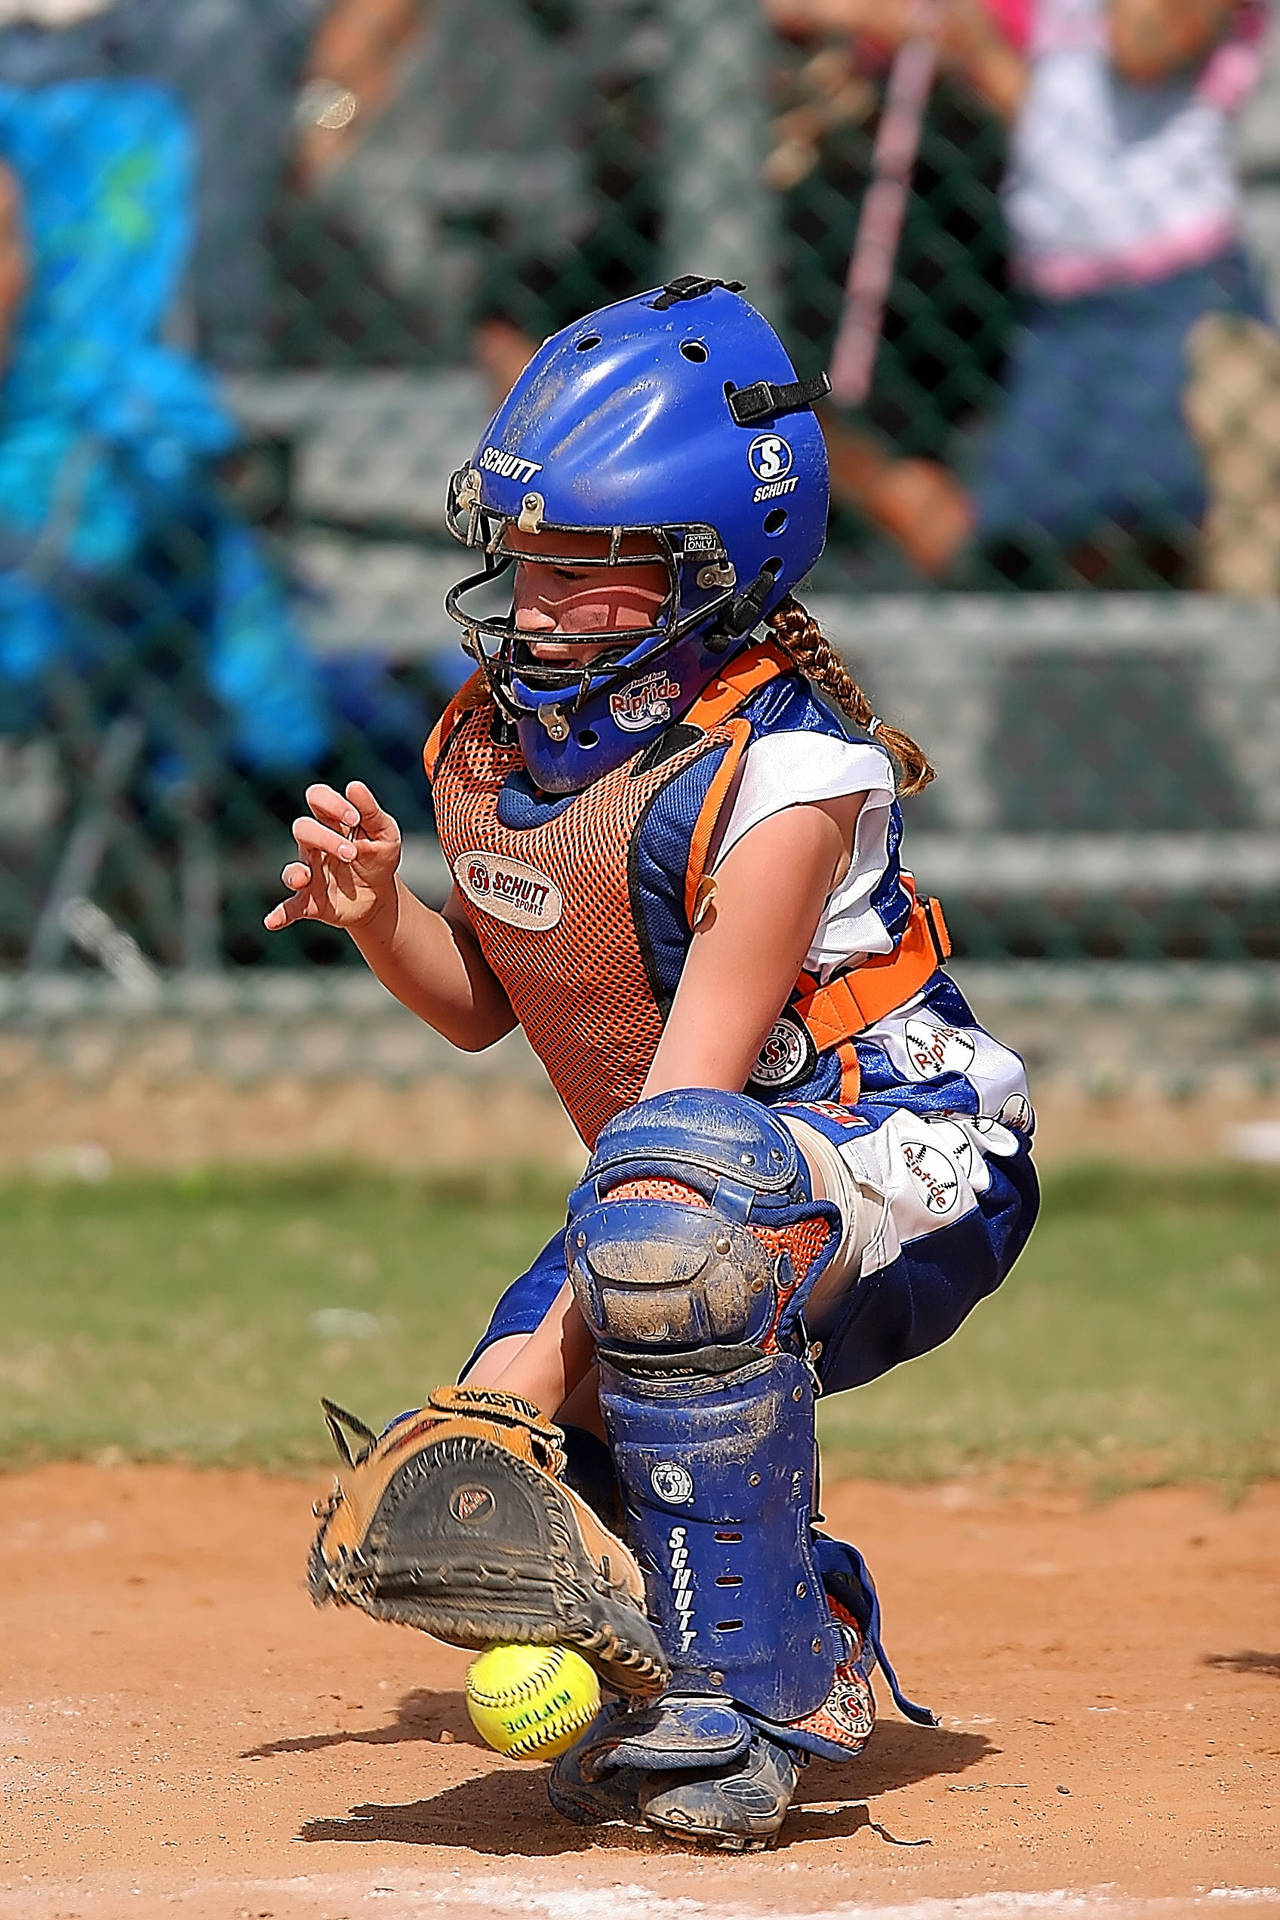 Softball Player With Dirt Covered Uniform Wallpaper